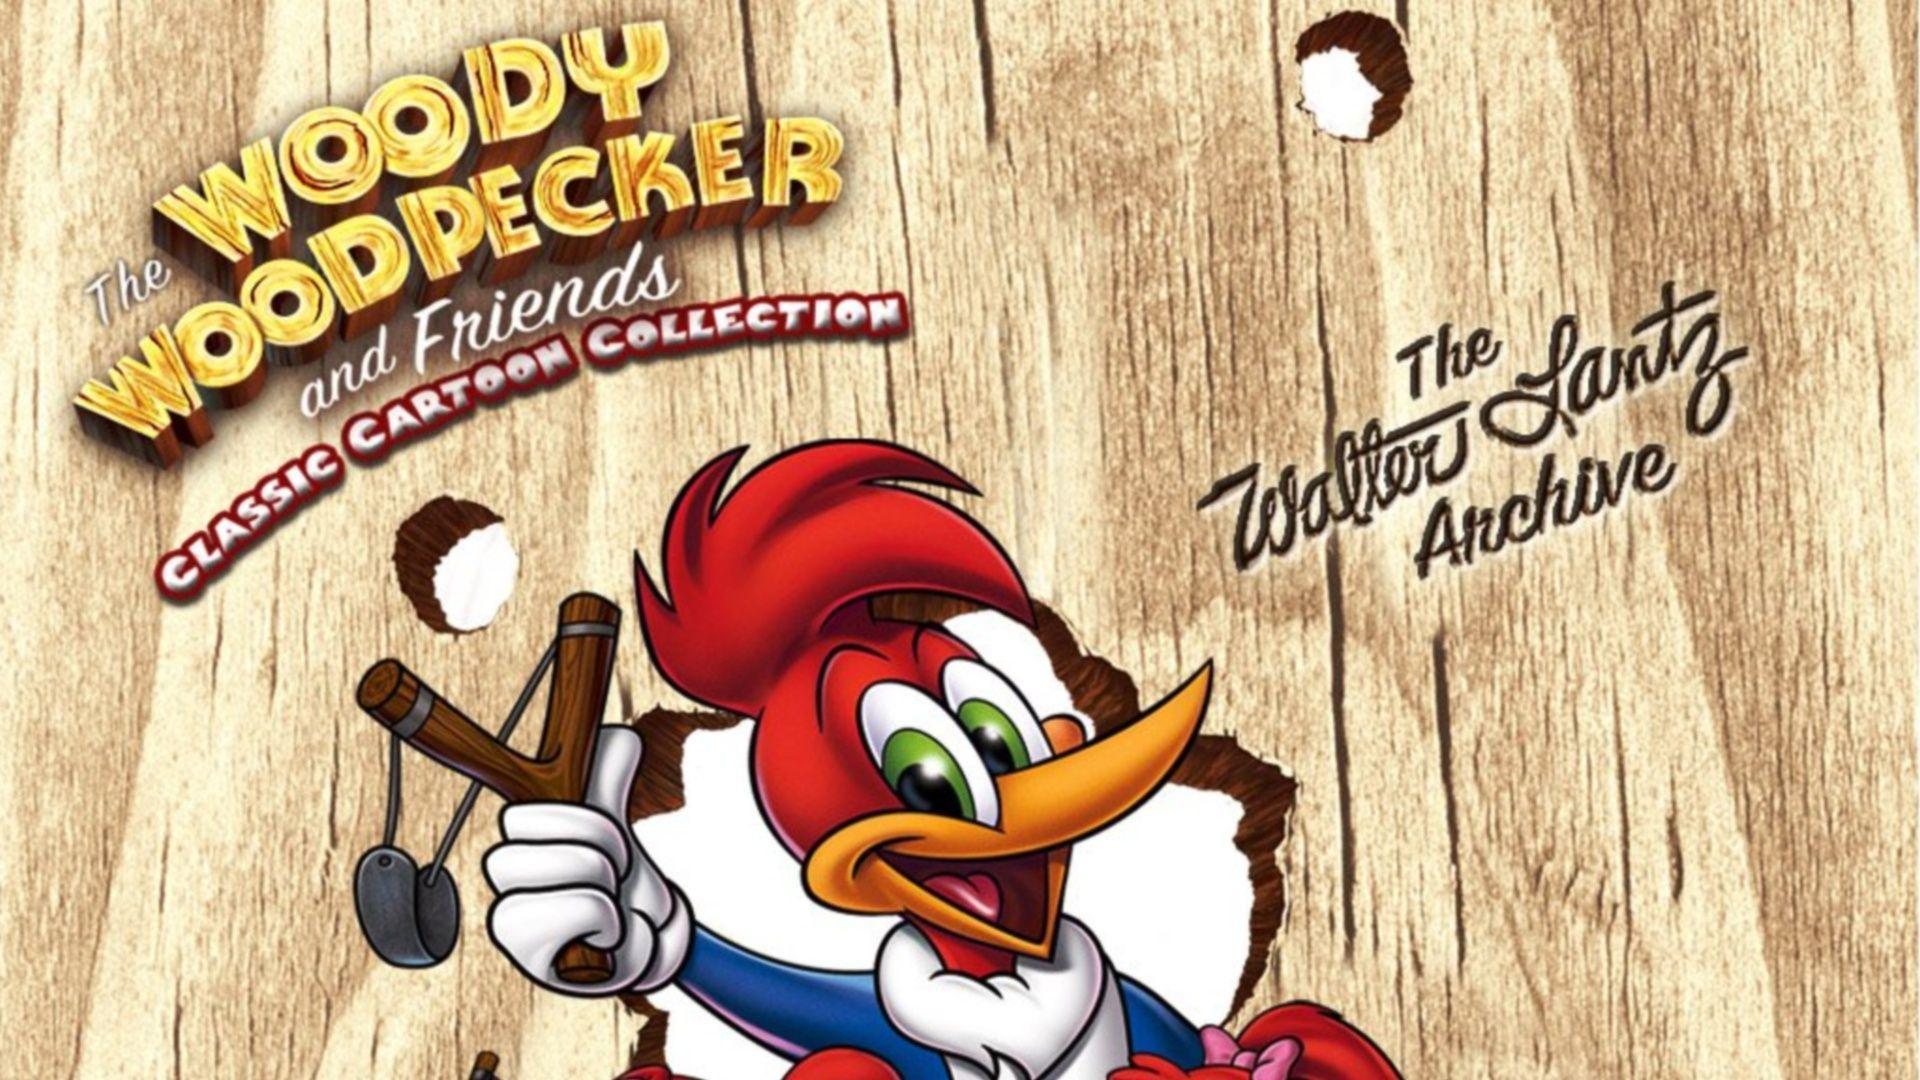 Woody Woodpecker Wallpapers, Woody Woodpecker High Quality